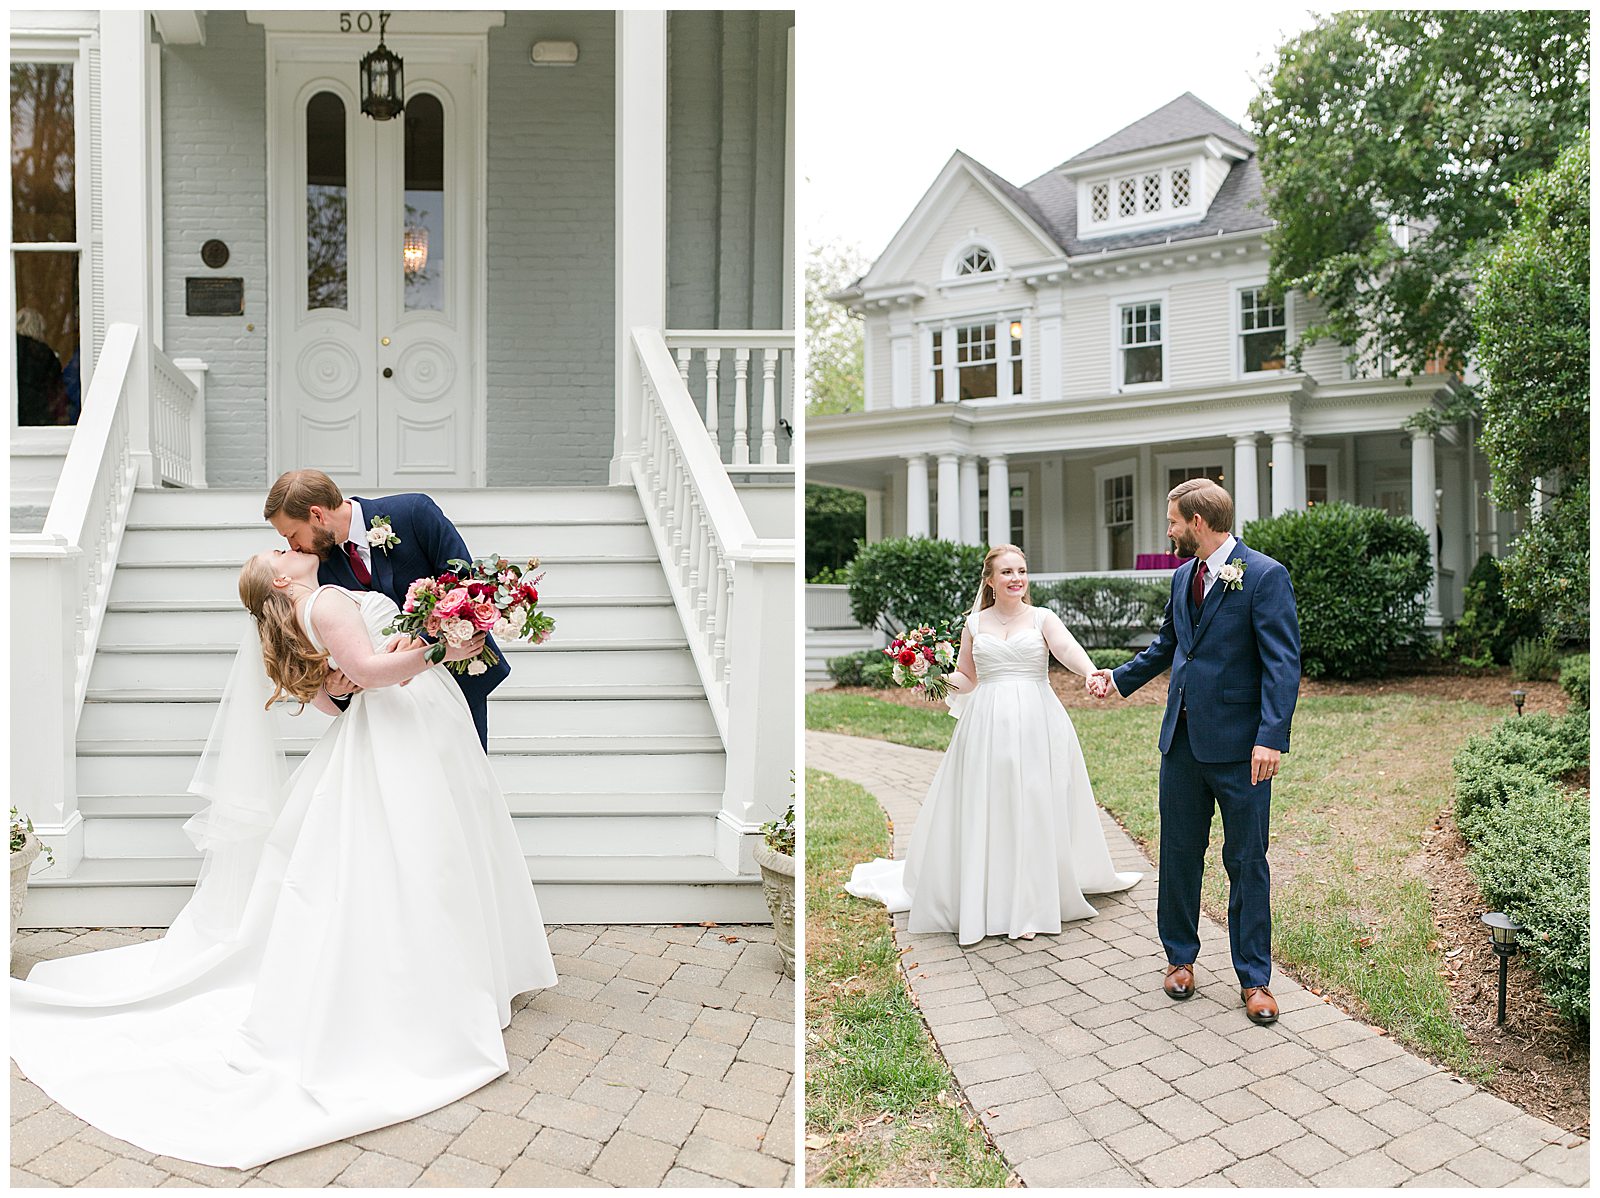 Collage of bride and groom dipping and kissing in front of porch, and walking in front of historic home